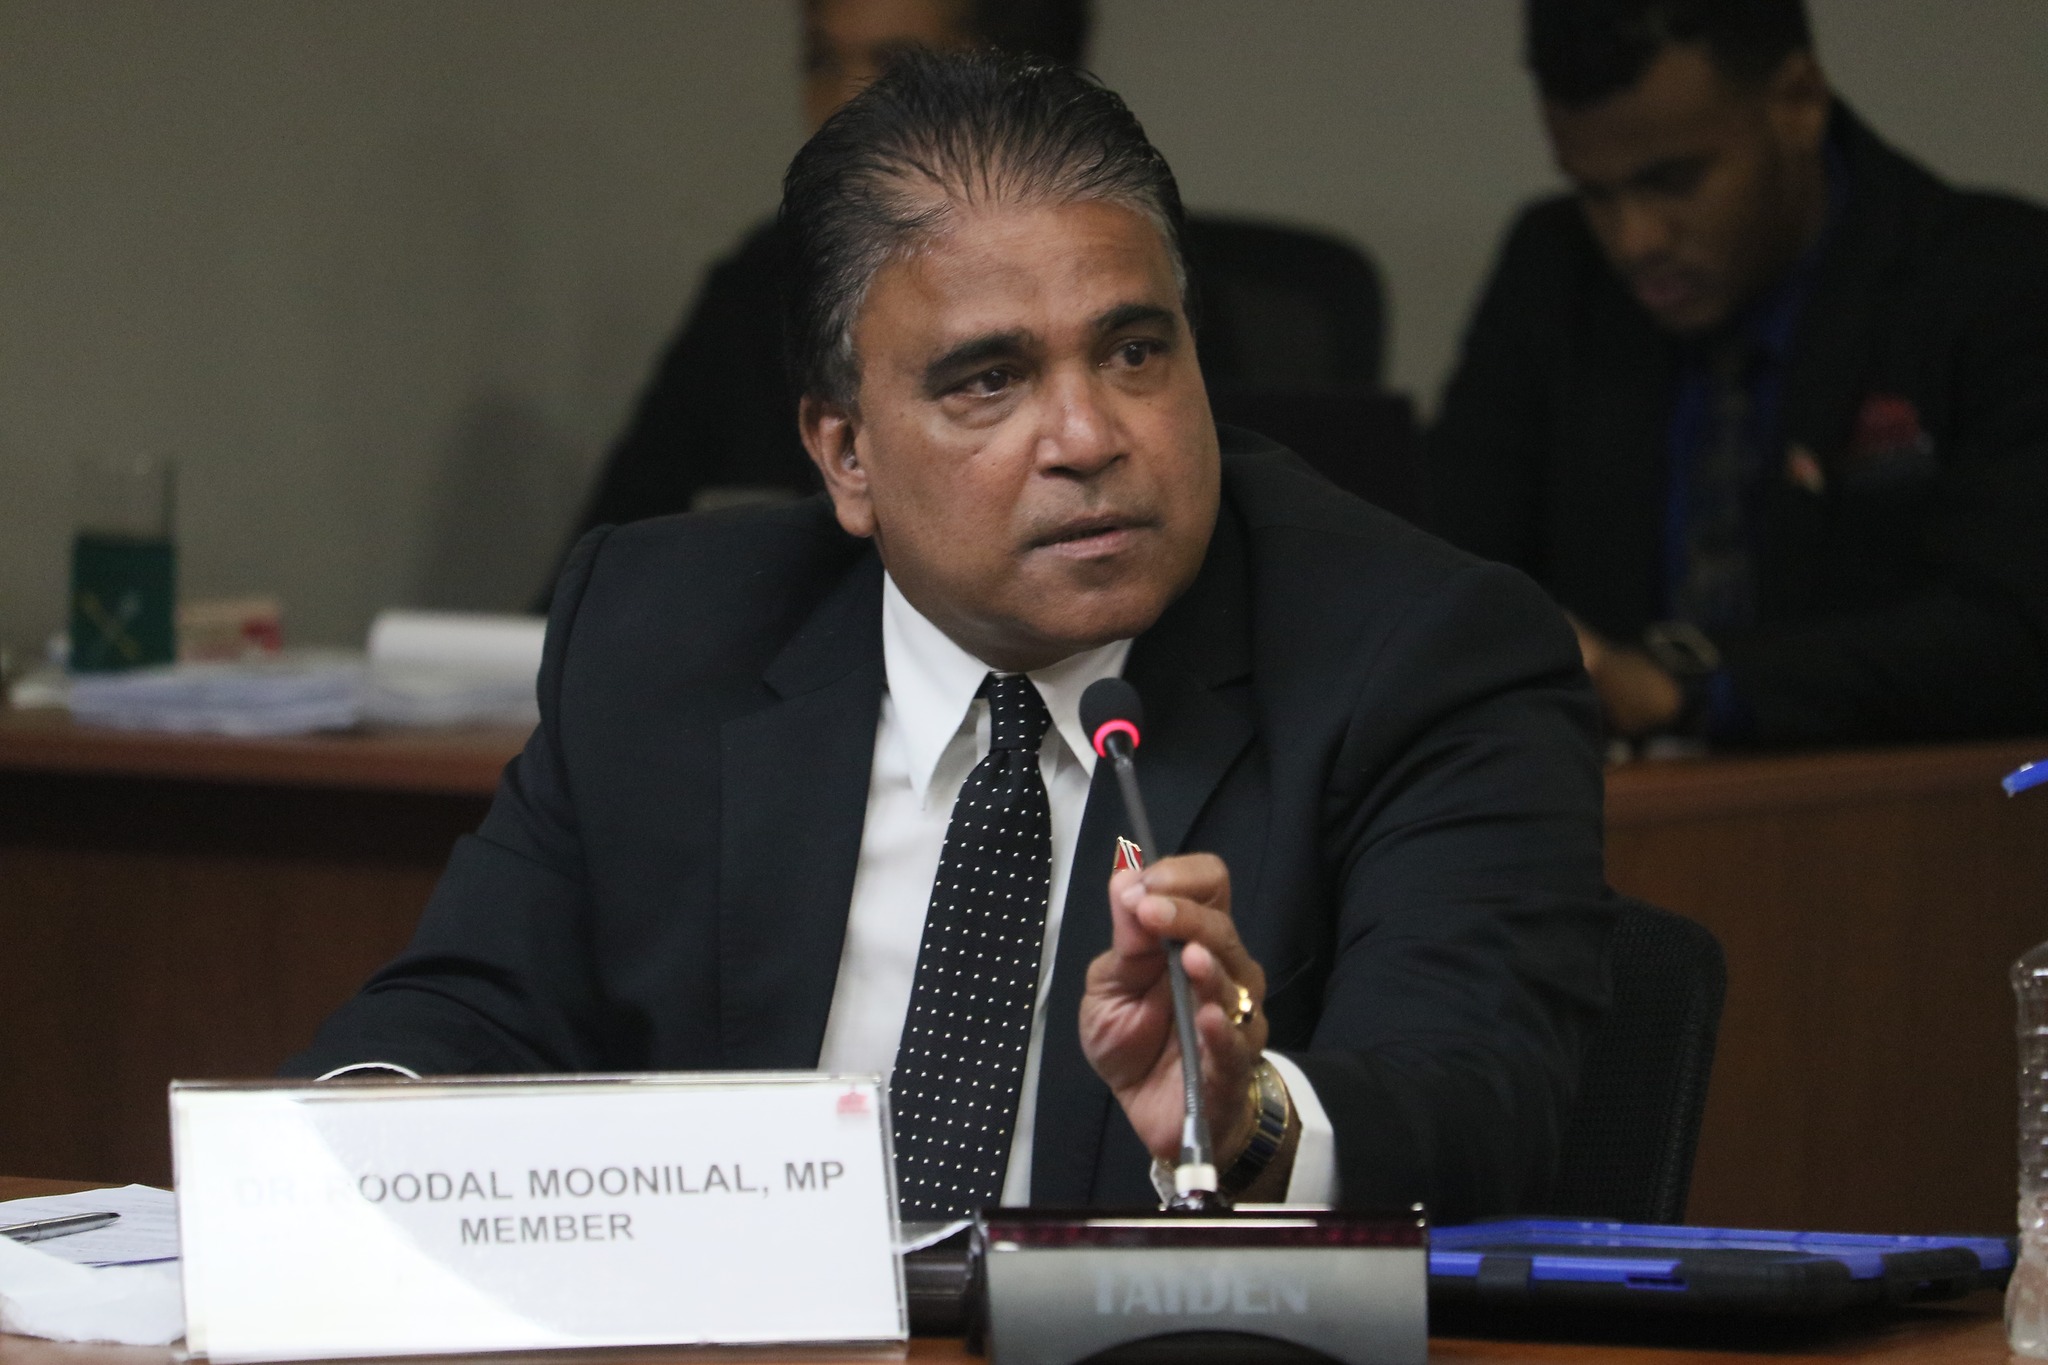 Moonilal blames UDECOTT for “flooding mess” at Health Ministry office